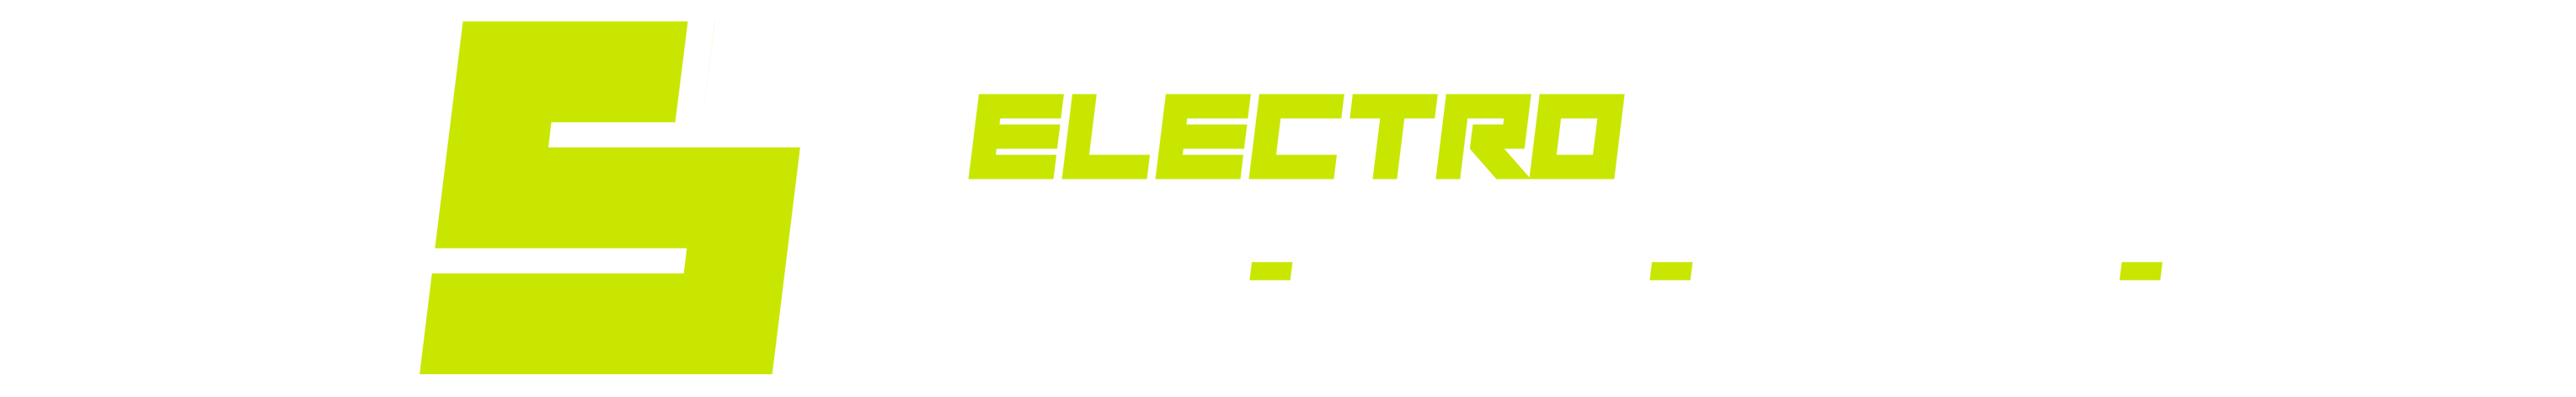 Electro Solutions Kft.